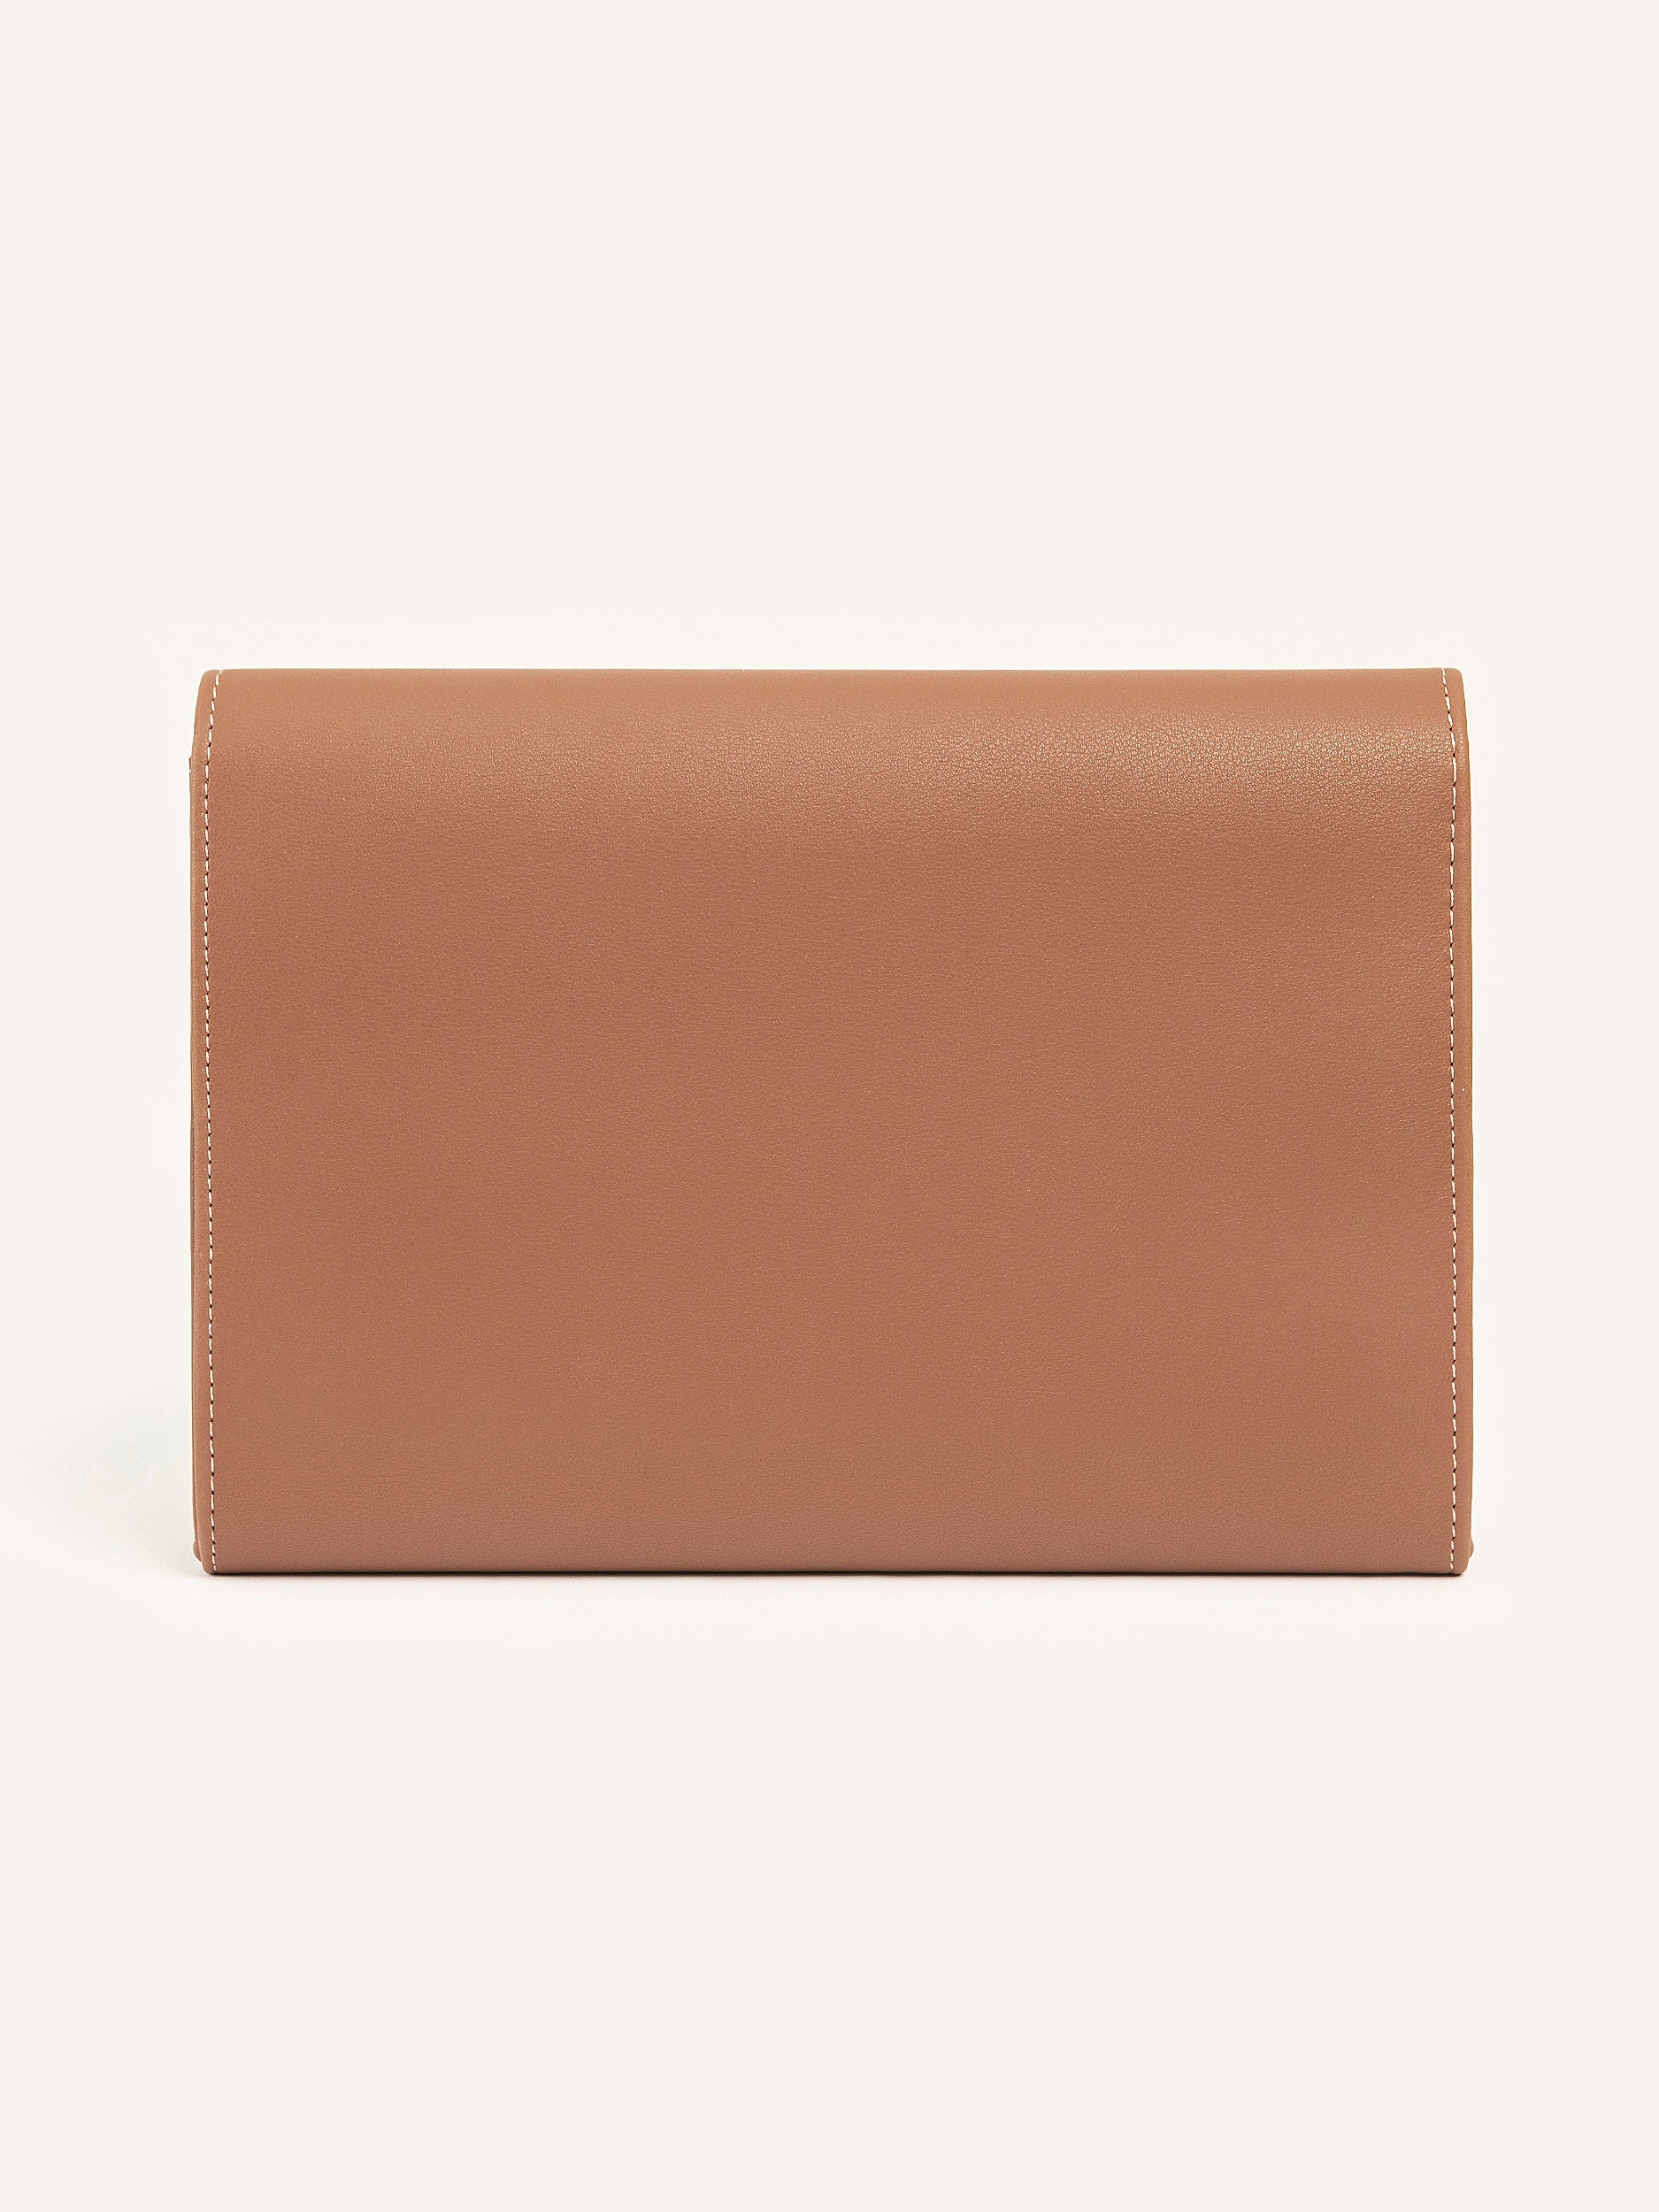 Limelight PM Clutch - Brown – ZAK BAGS ©️